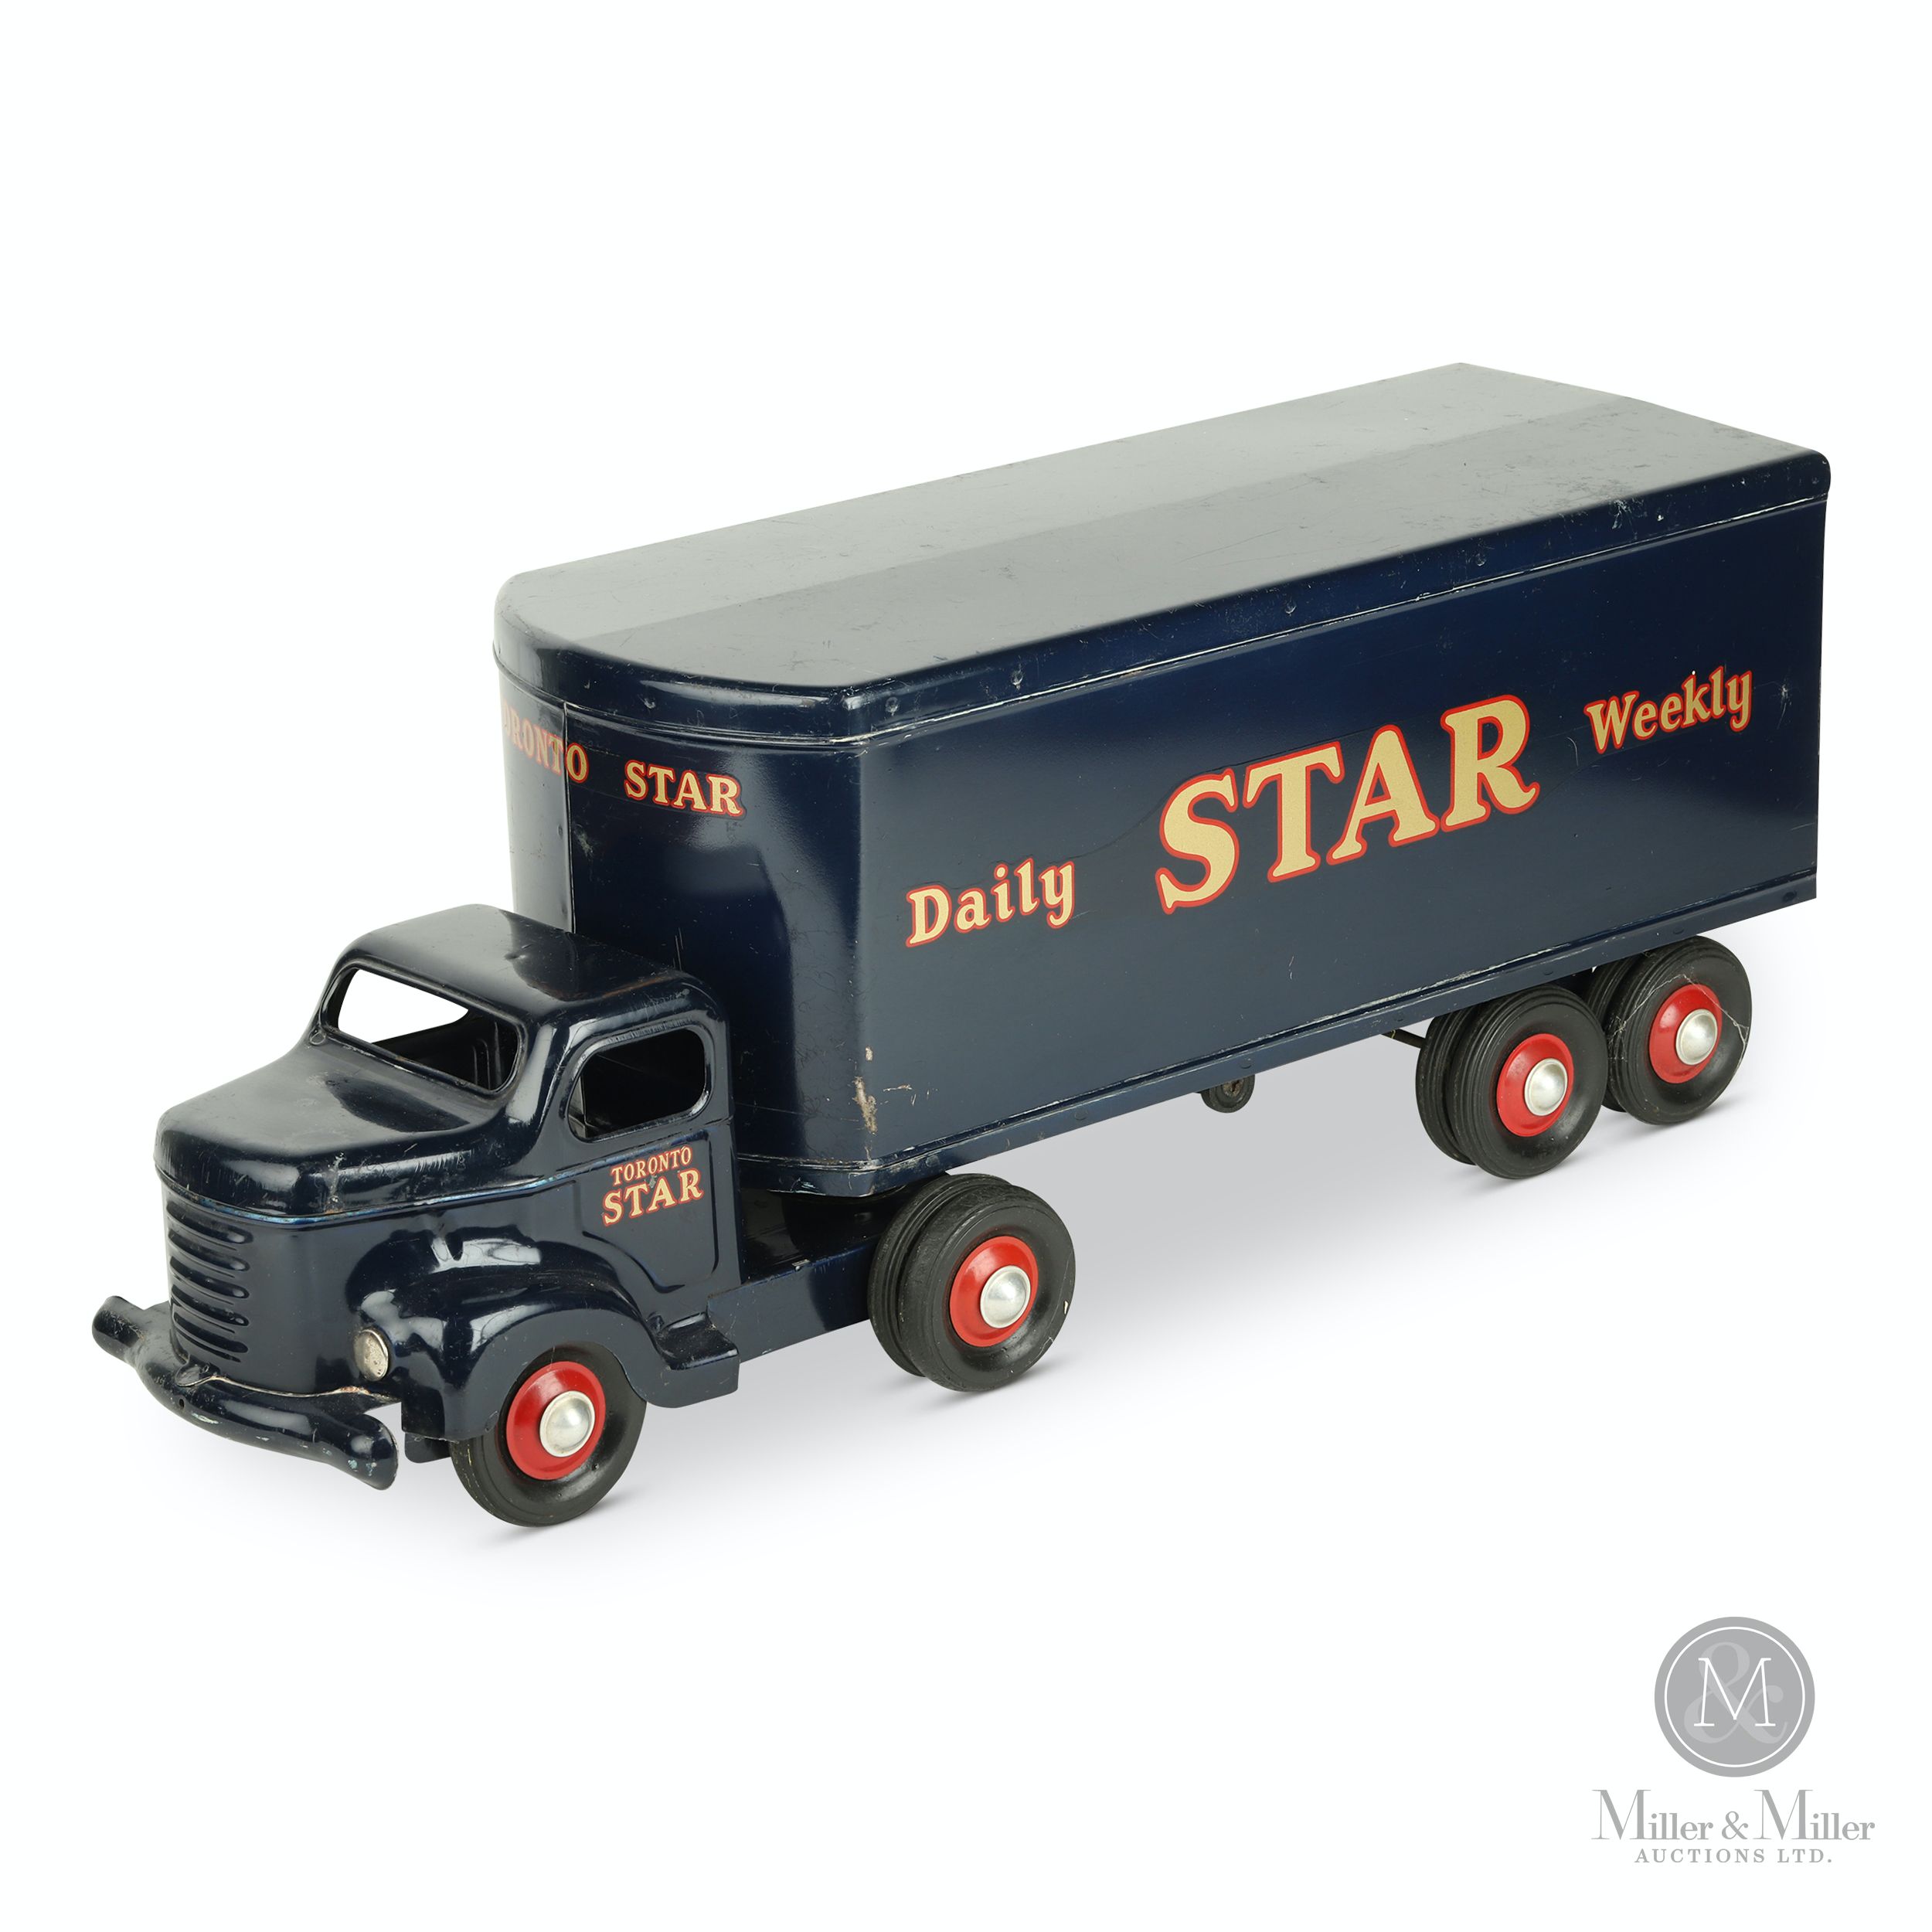 Canada Otaco Minnitoy Pressed Steel Toronto Star Delivery Truck decal set 